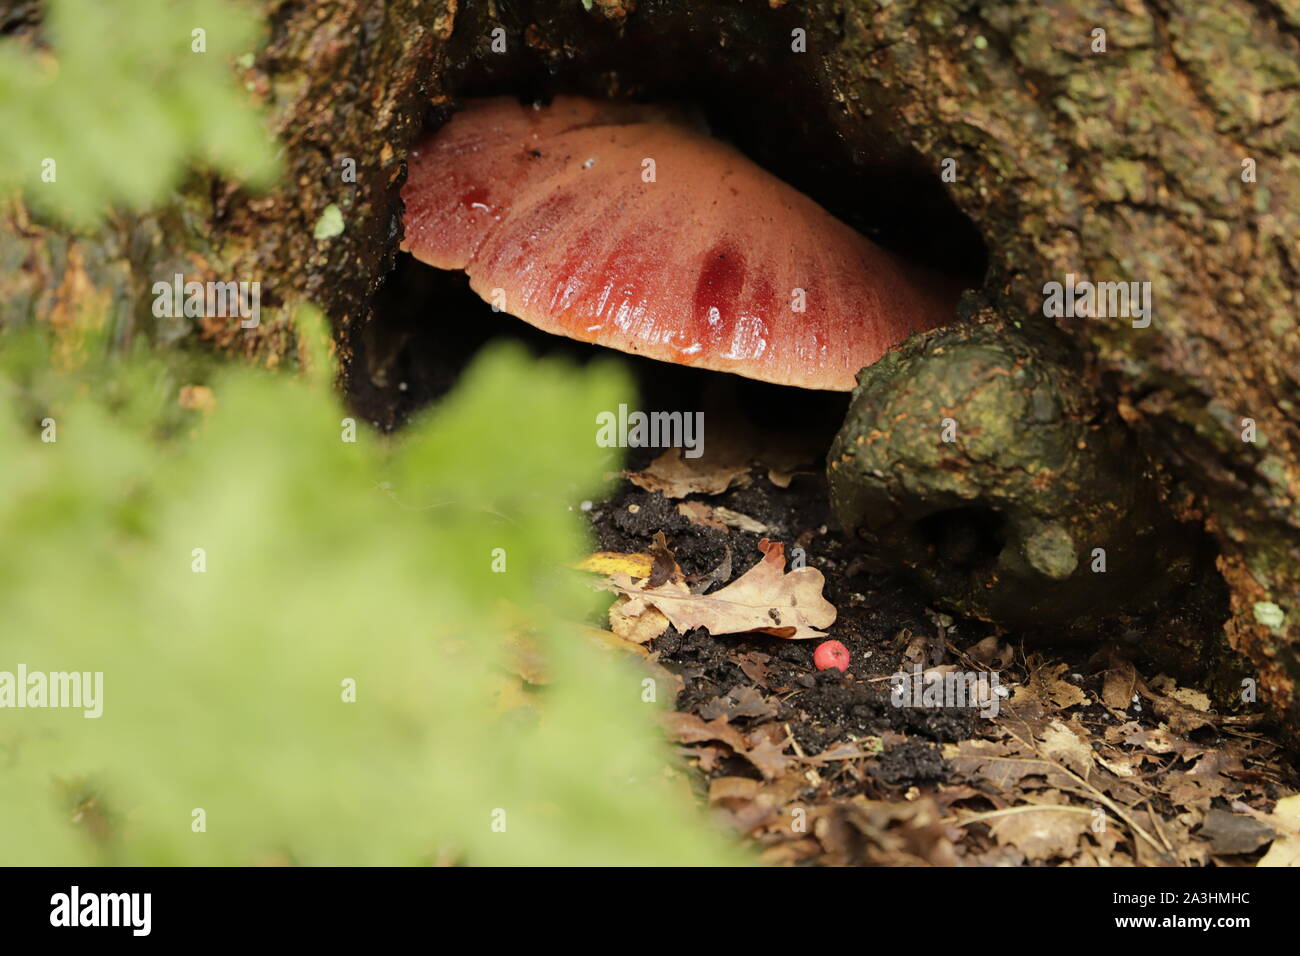 Beefsteak or Oxtongue is this fungus called. The latin name is Fistulina hepatica Stock Photo